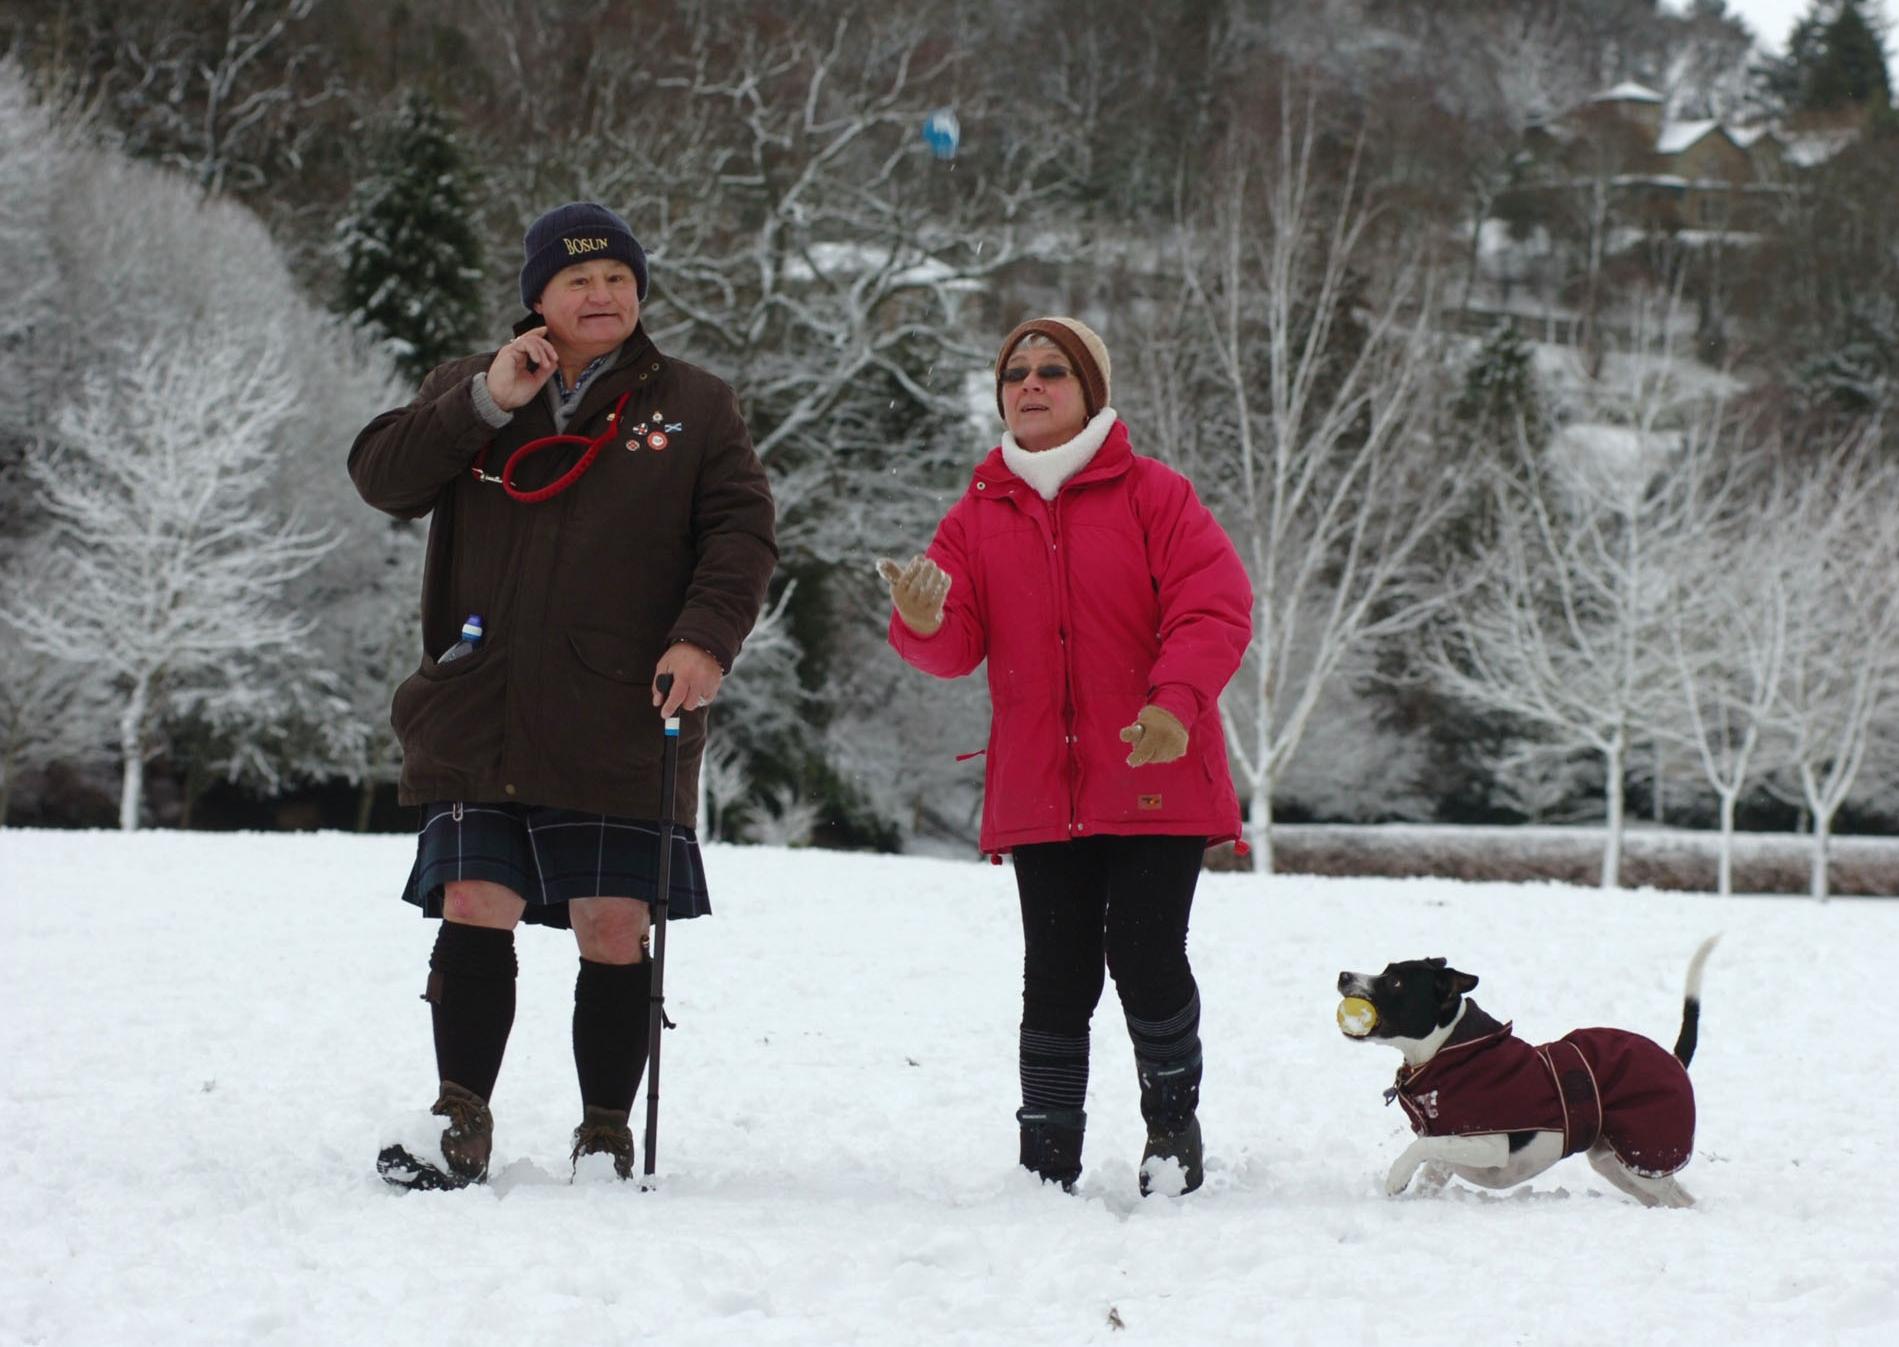 James MacSeoras-Blair with his wife Jaqueline and Dexter the dog take a walk in the snow at Wilton Park, Hawick.